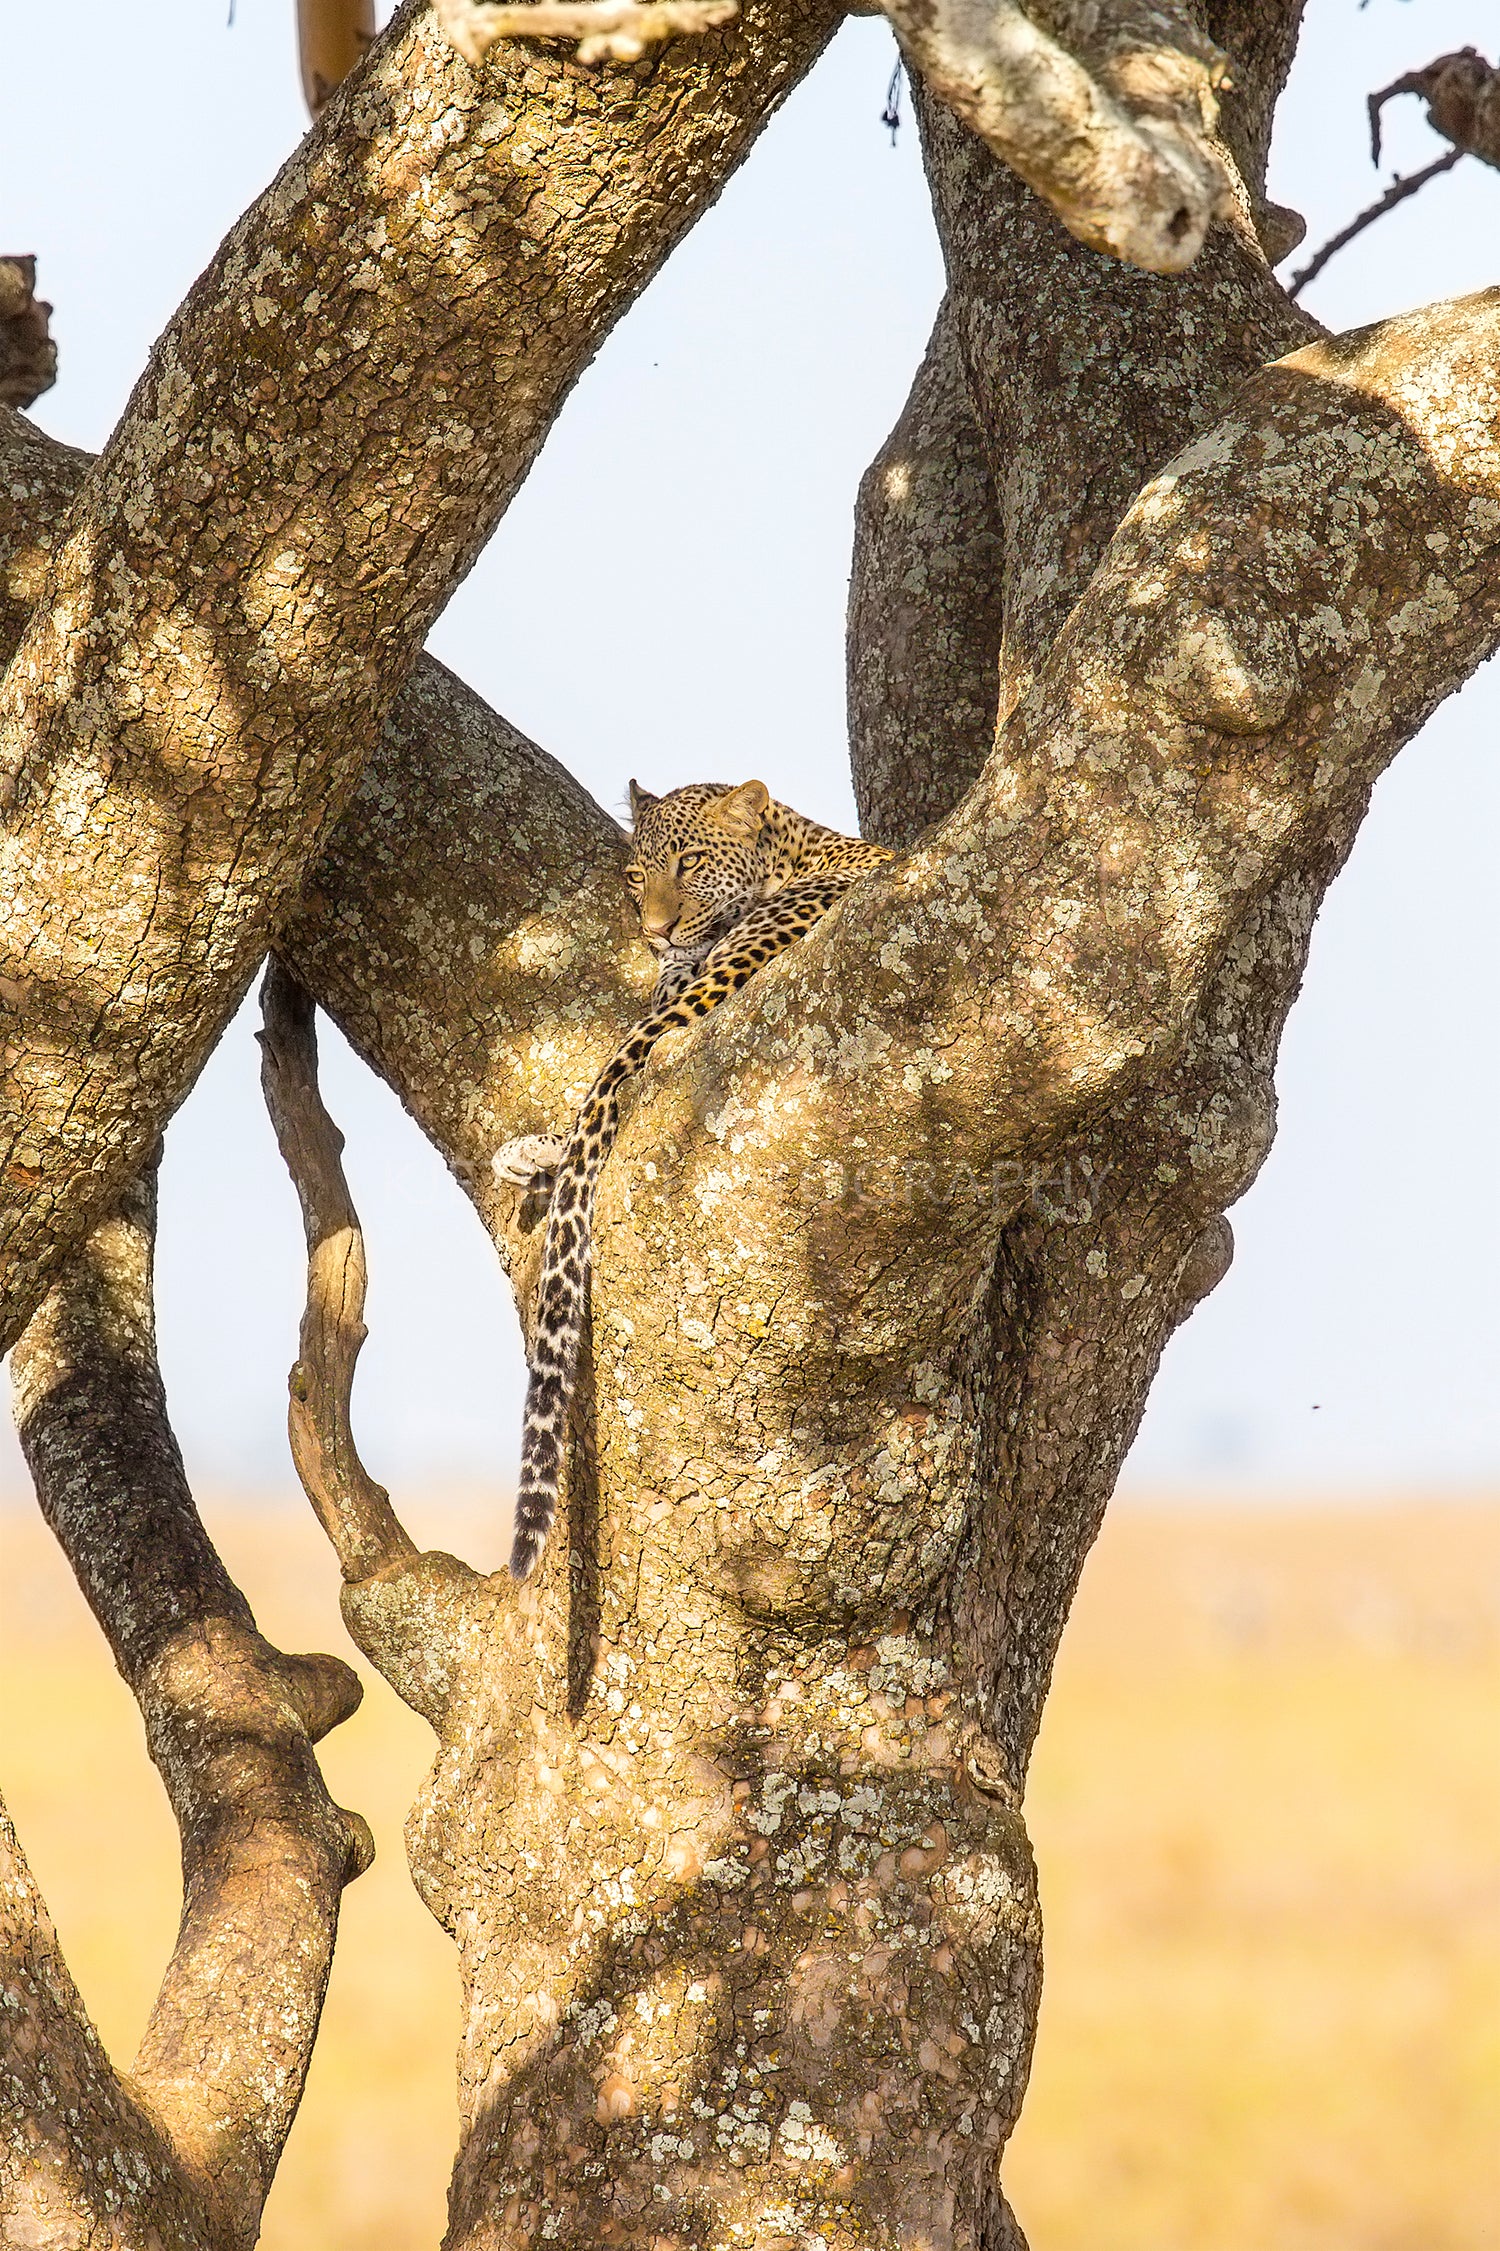 Leopard rests in a tree after meal in Serengeti